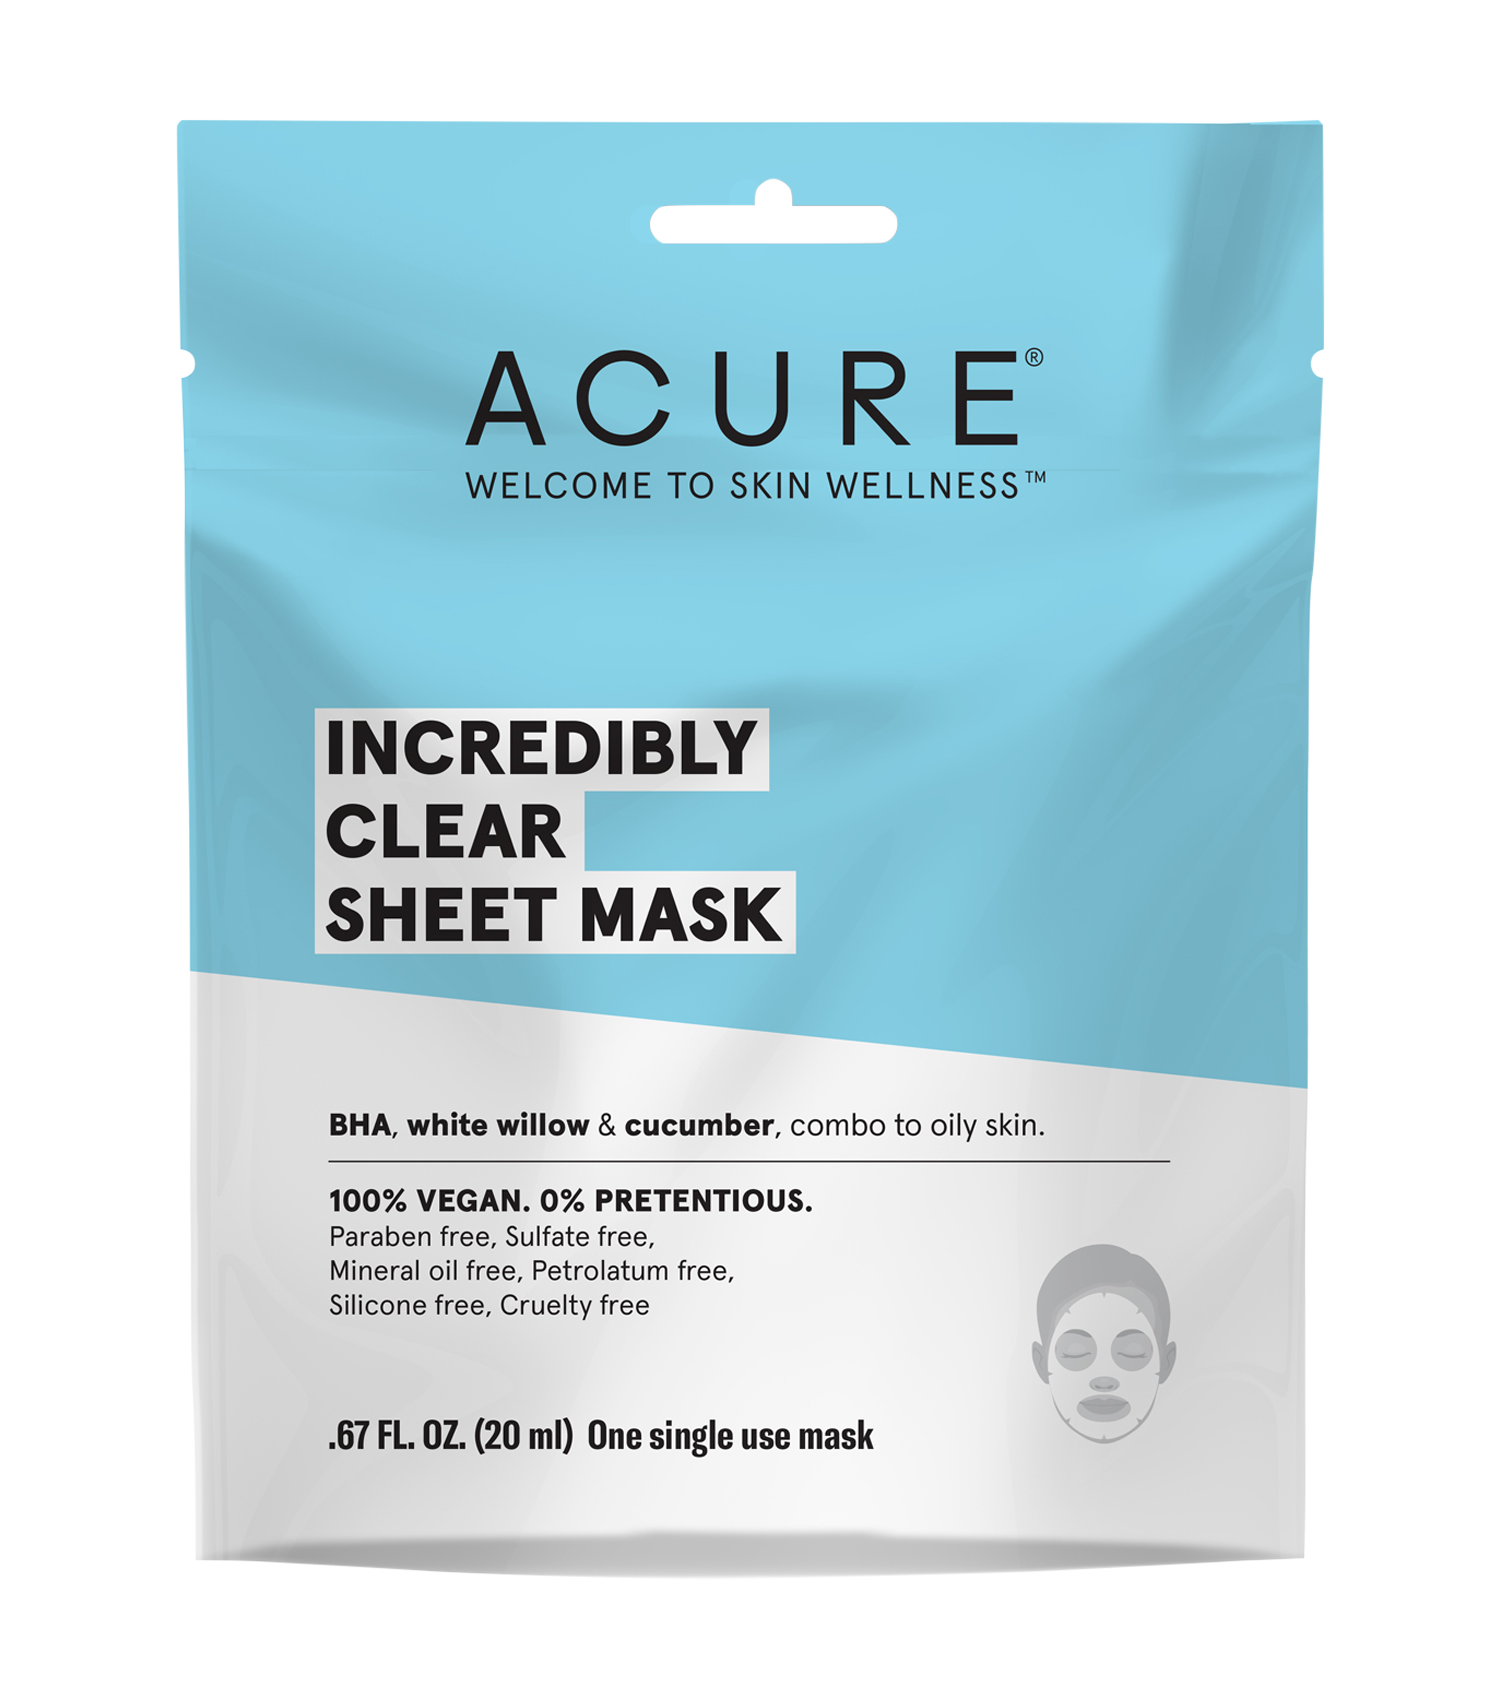 Acure Organics INCREDIBLY CLEAR SHEET MASK Incredibly Clear Sheet Mask 1